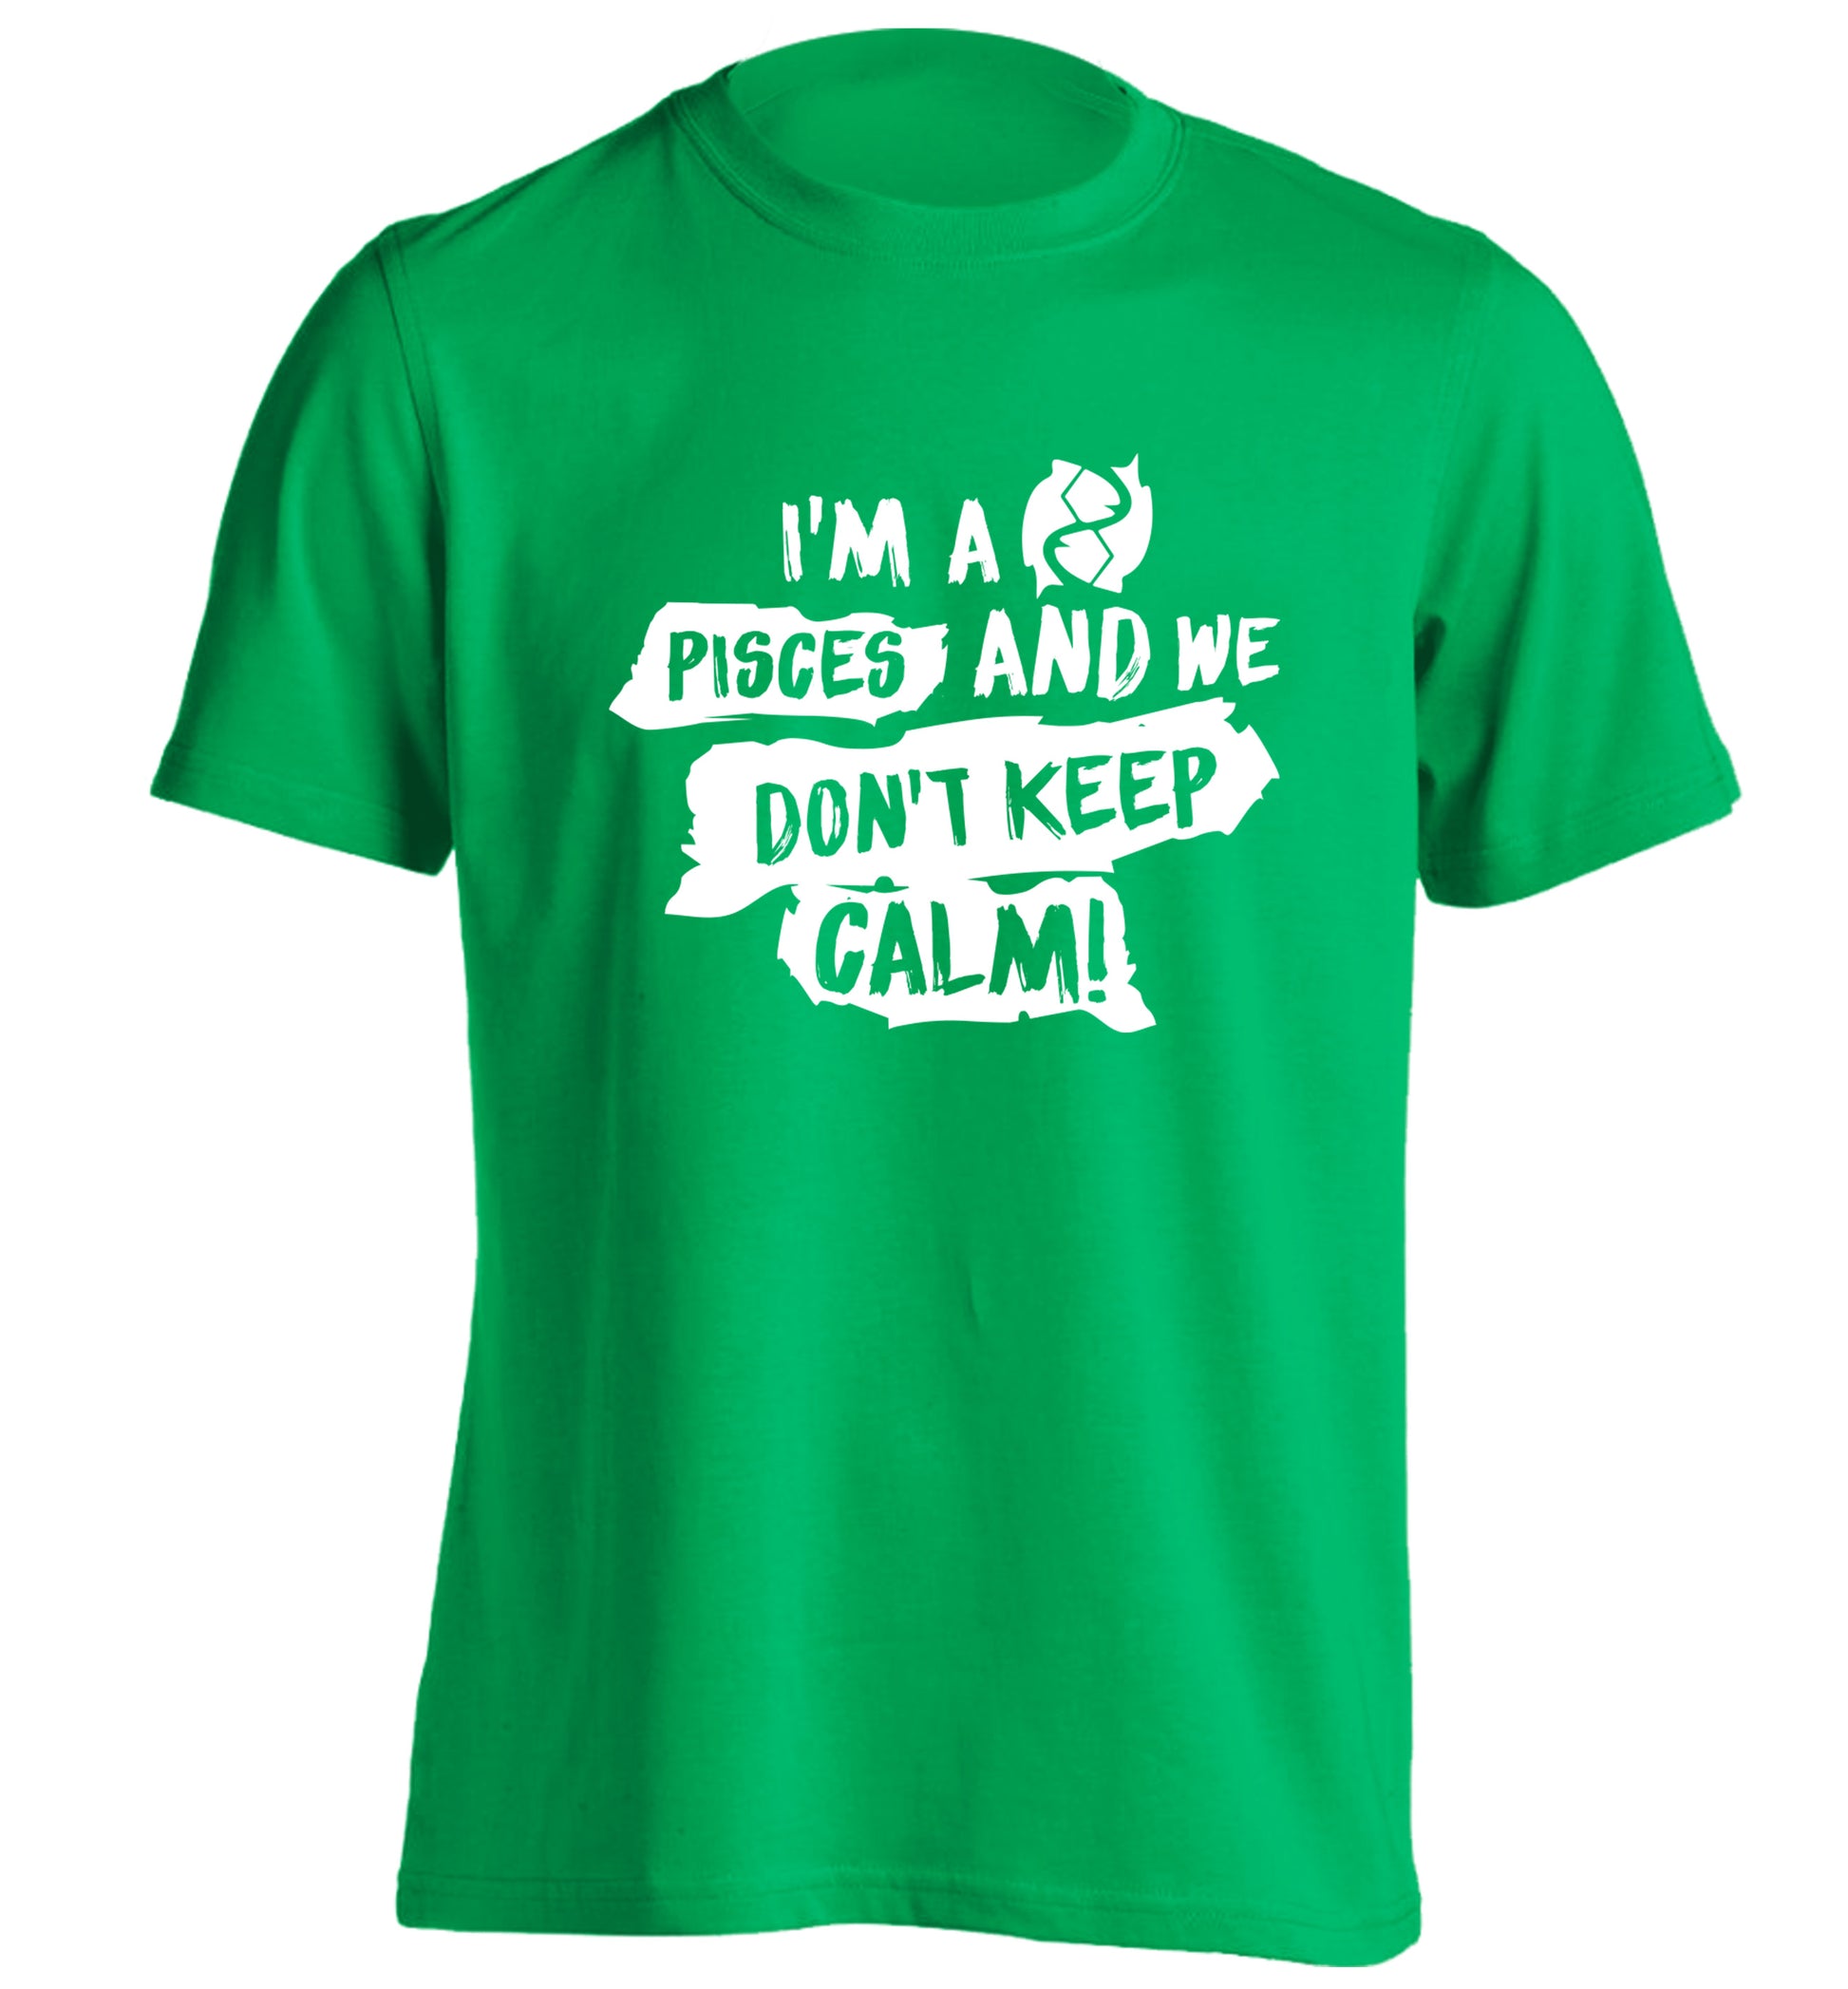 I'm a pisces and we don't keep calm adults unisex green Tshirt 2XL